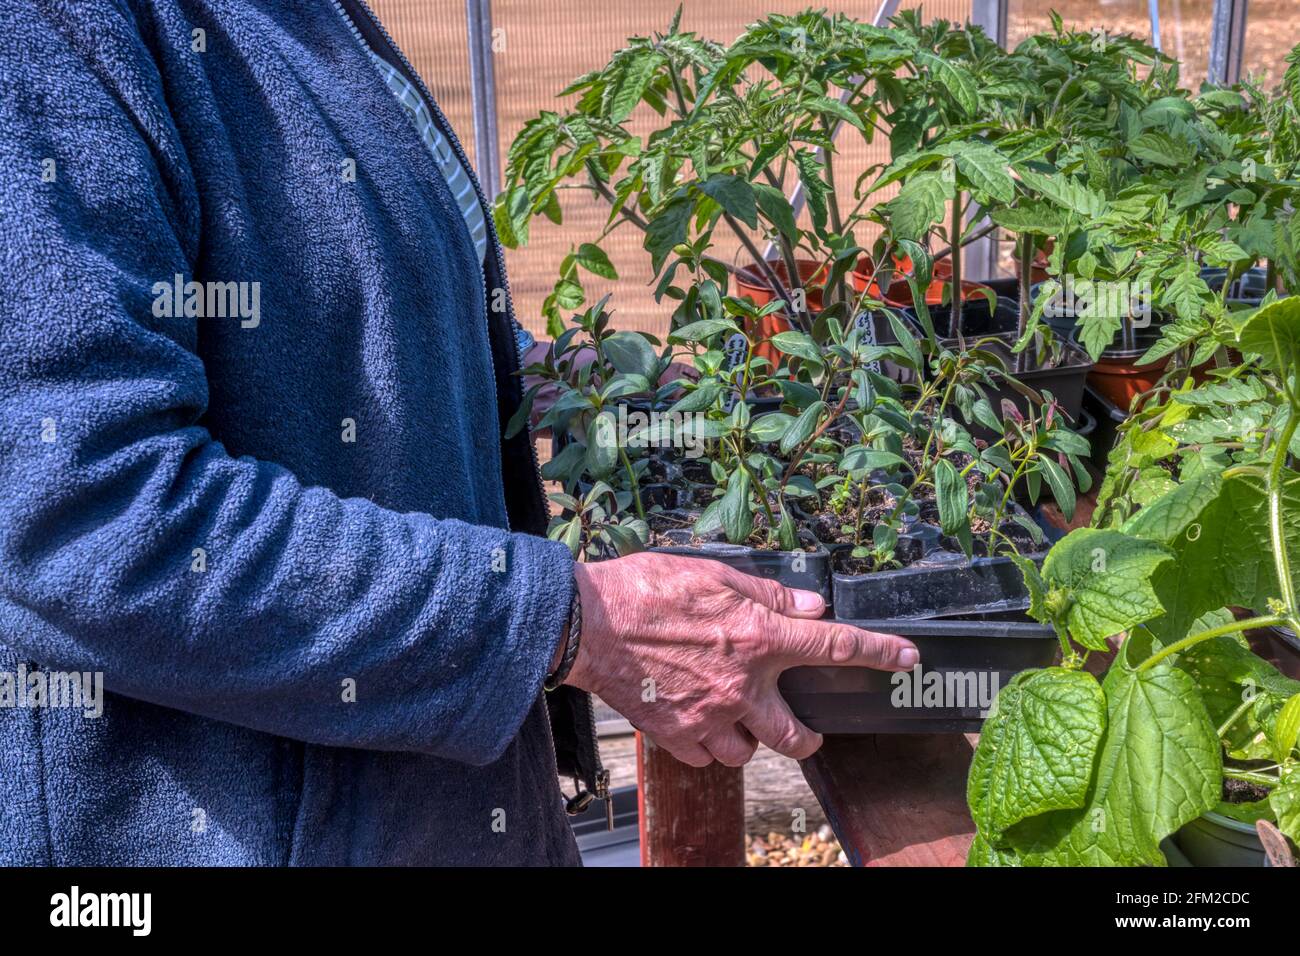 A woman moving plants on the benches or shelves in a small metal framed greenhouse. Stock Photo